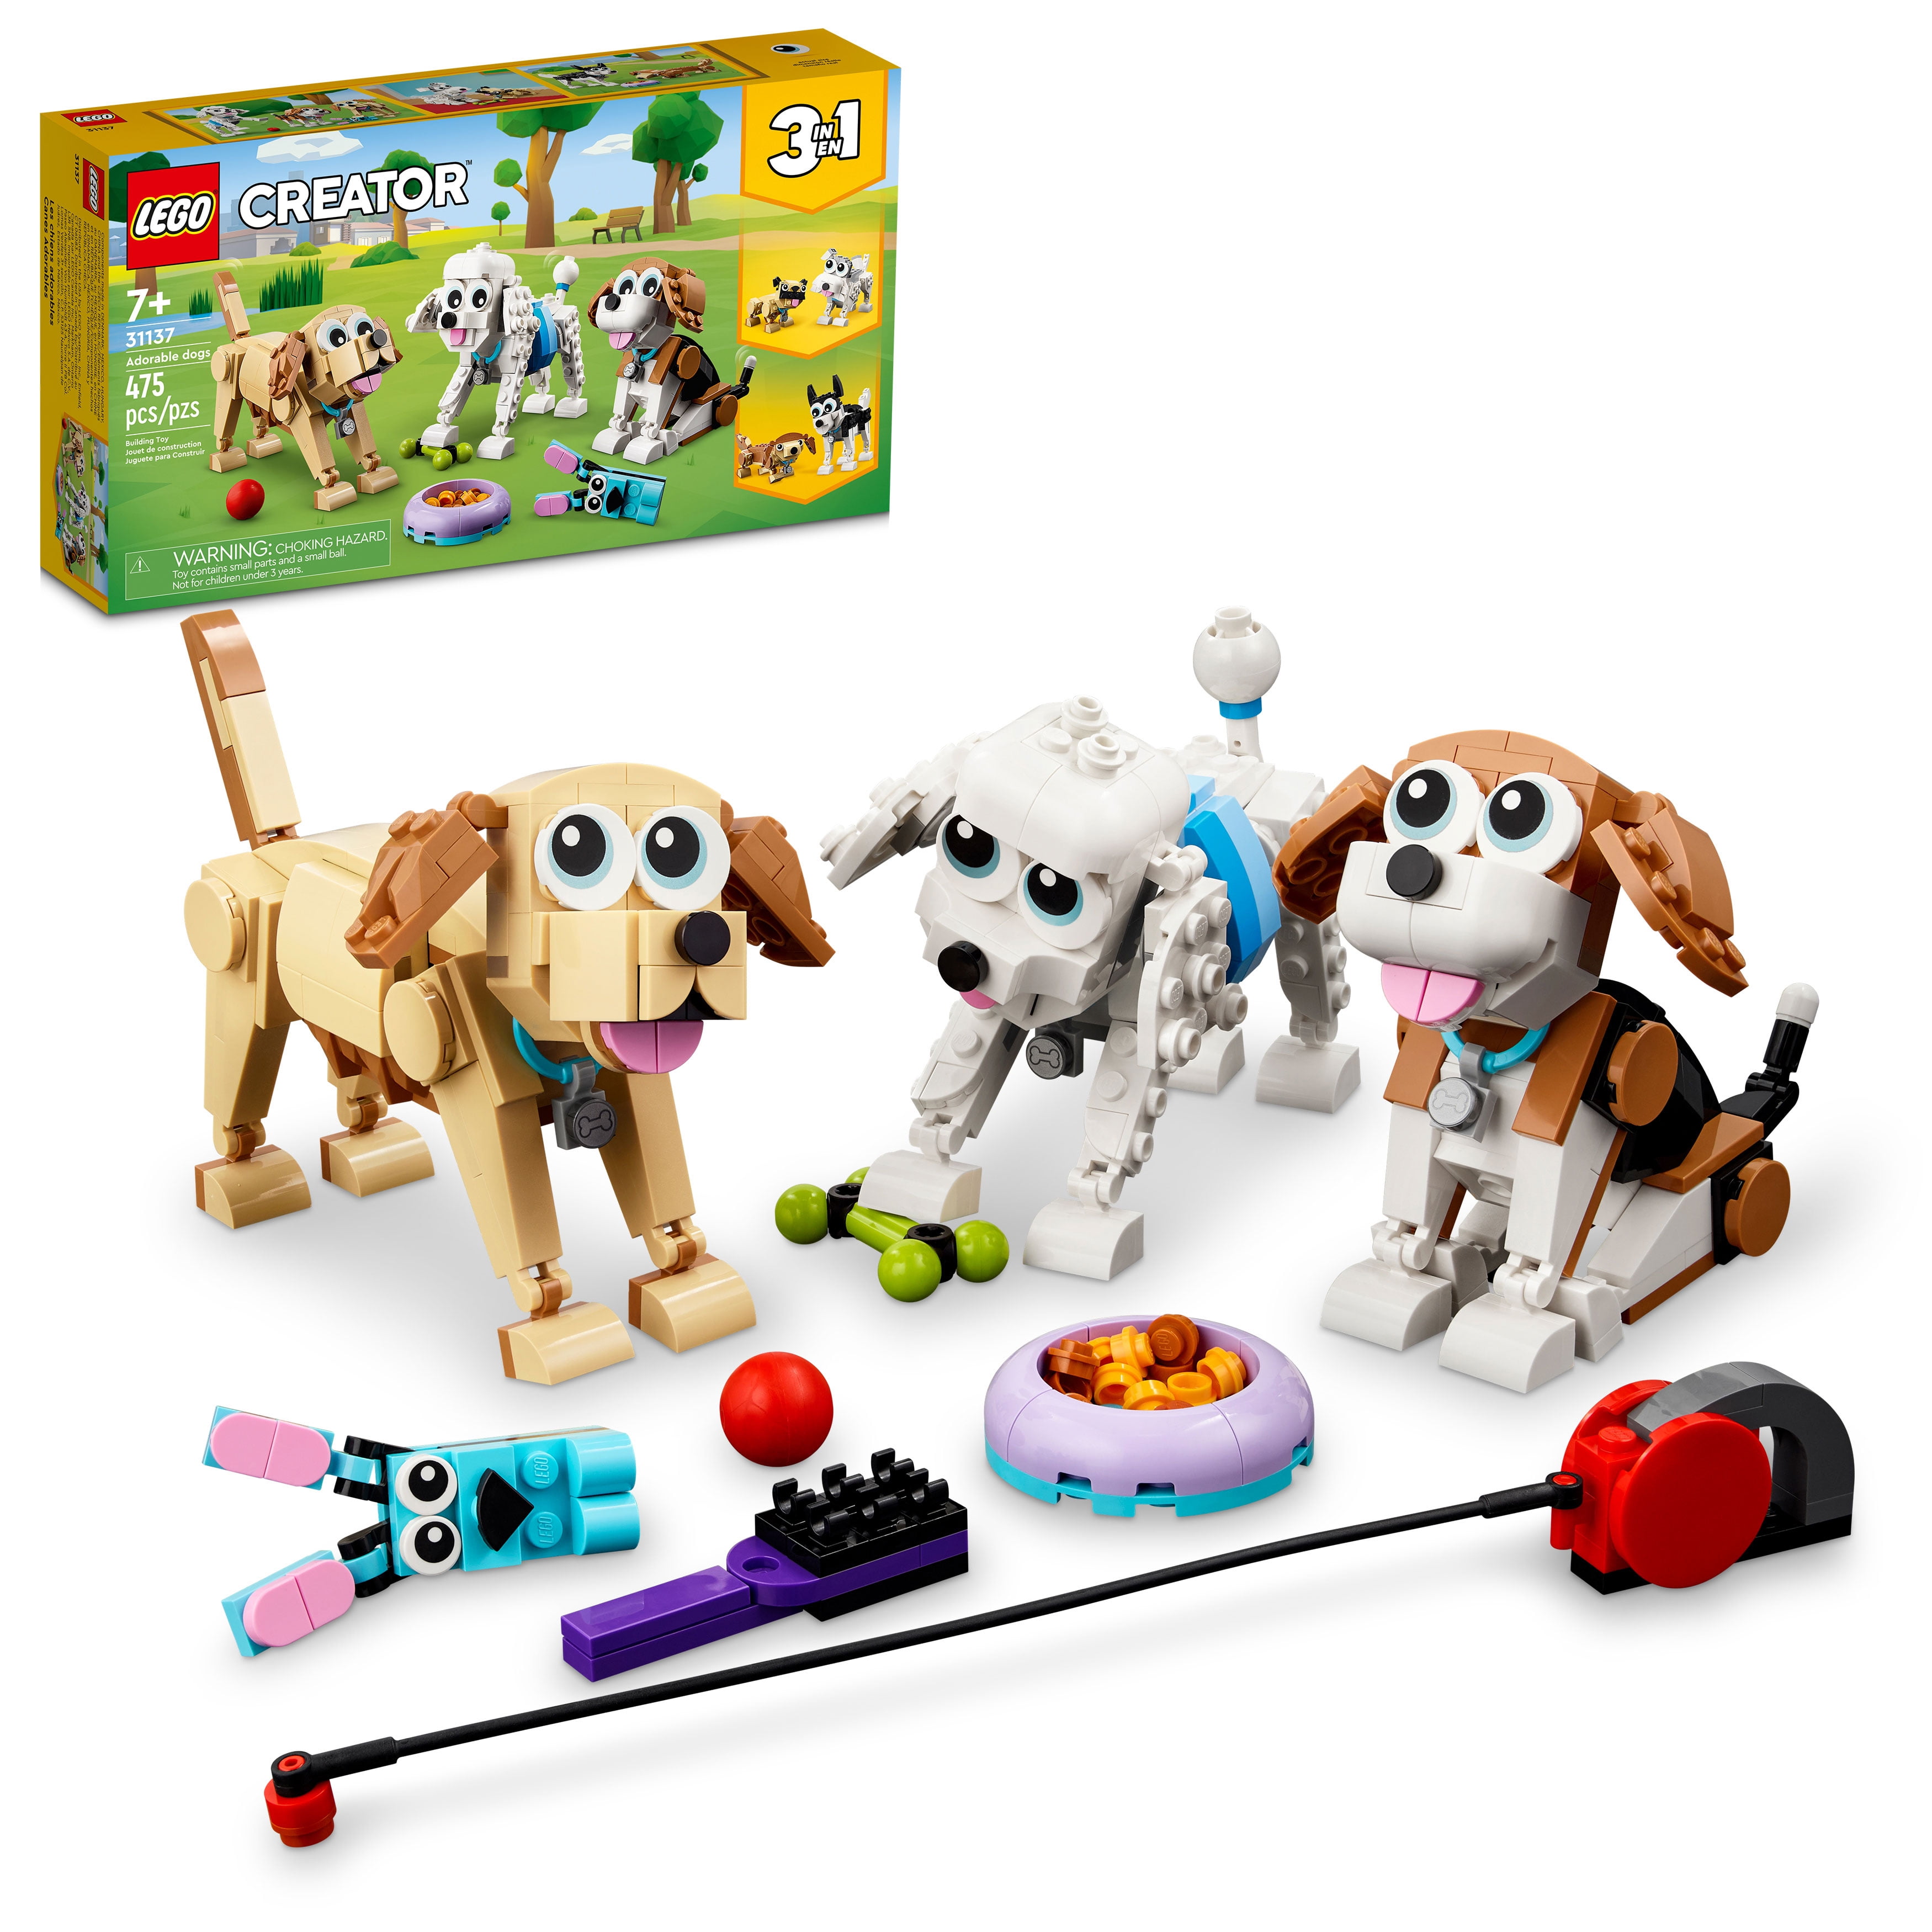 LEGO Creator 3-in-1 Adorable Dogs Building Toy Set 31137, Great Gift for Dog Lovers and Kids Ages 7 and Up, Featuring Canine Companions: Dachshund, Beagle, Pug, Poodle, Husky, and - Walmart.com